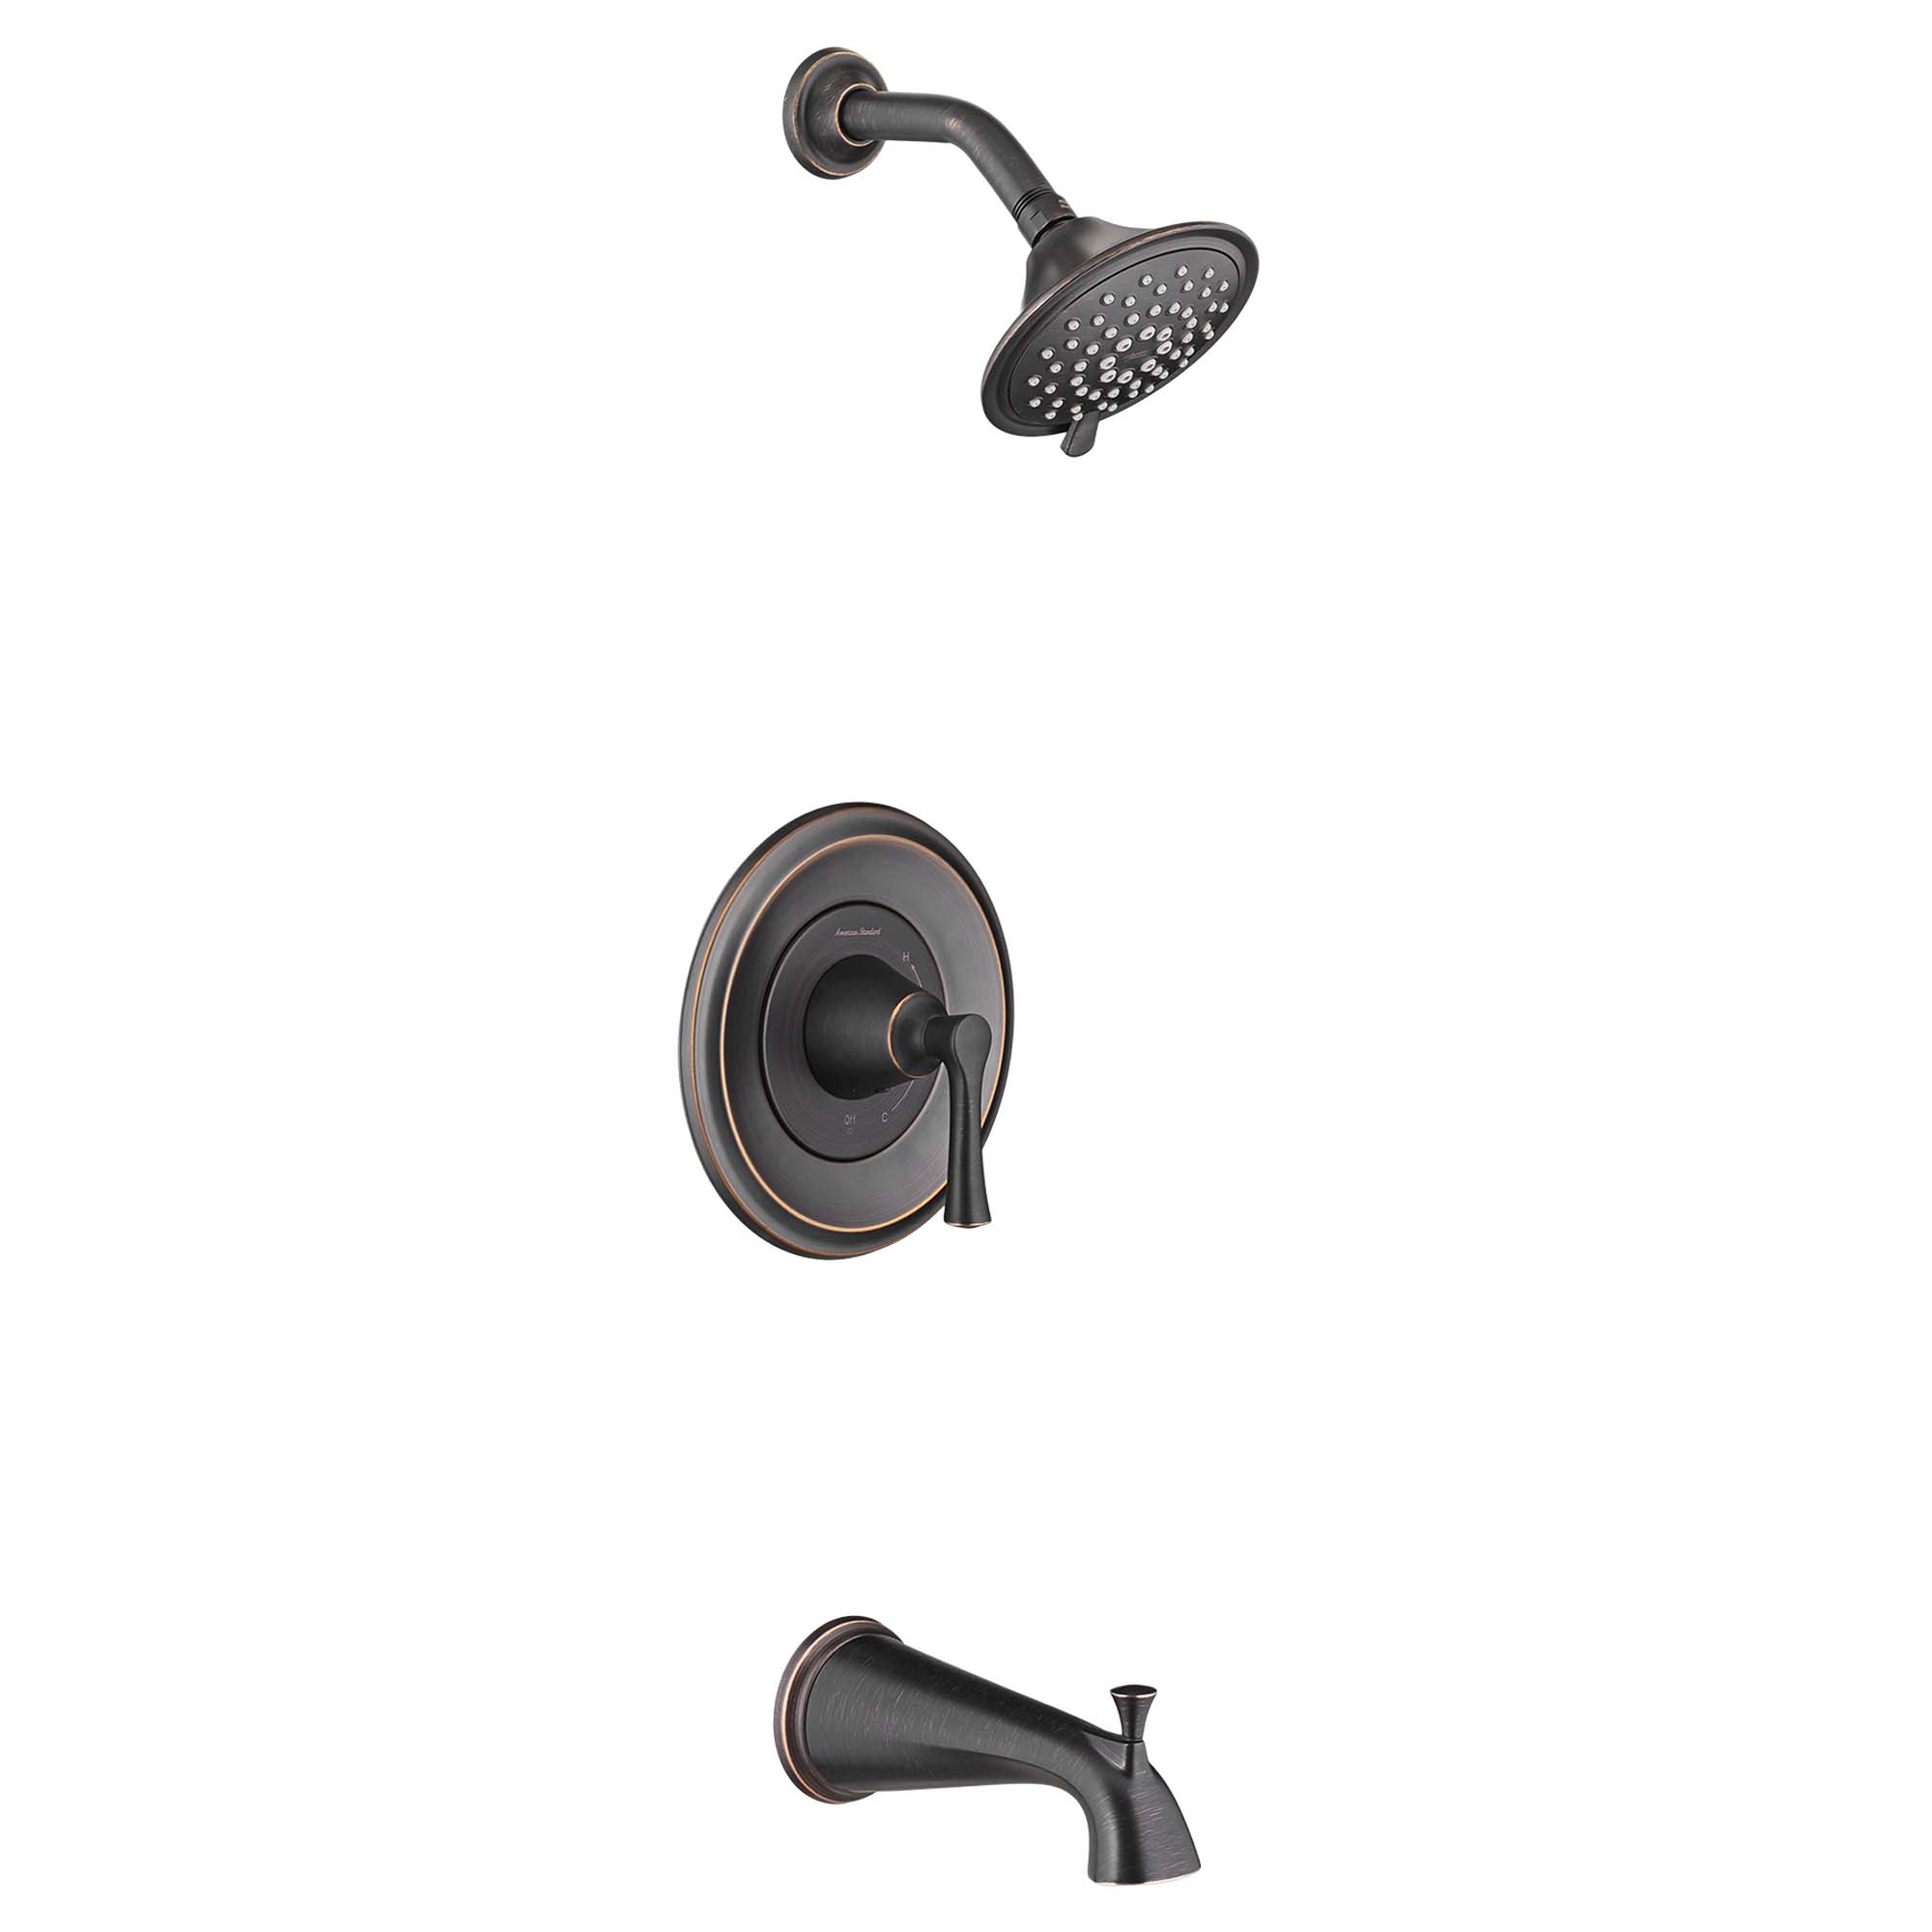 Estate 2.5 GPM Tub and Shower Trim Kit with 3-Function Showerhead and Lever Handle